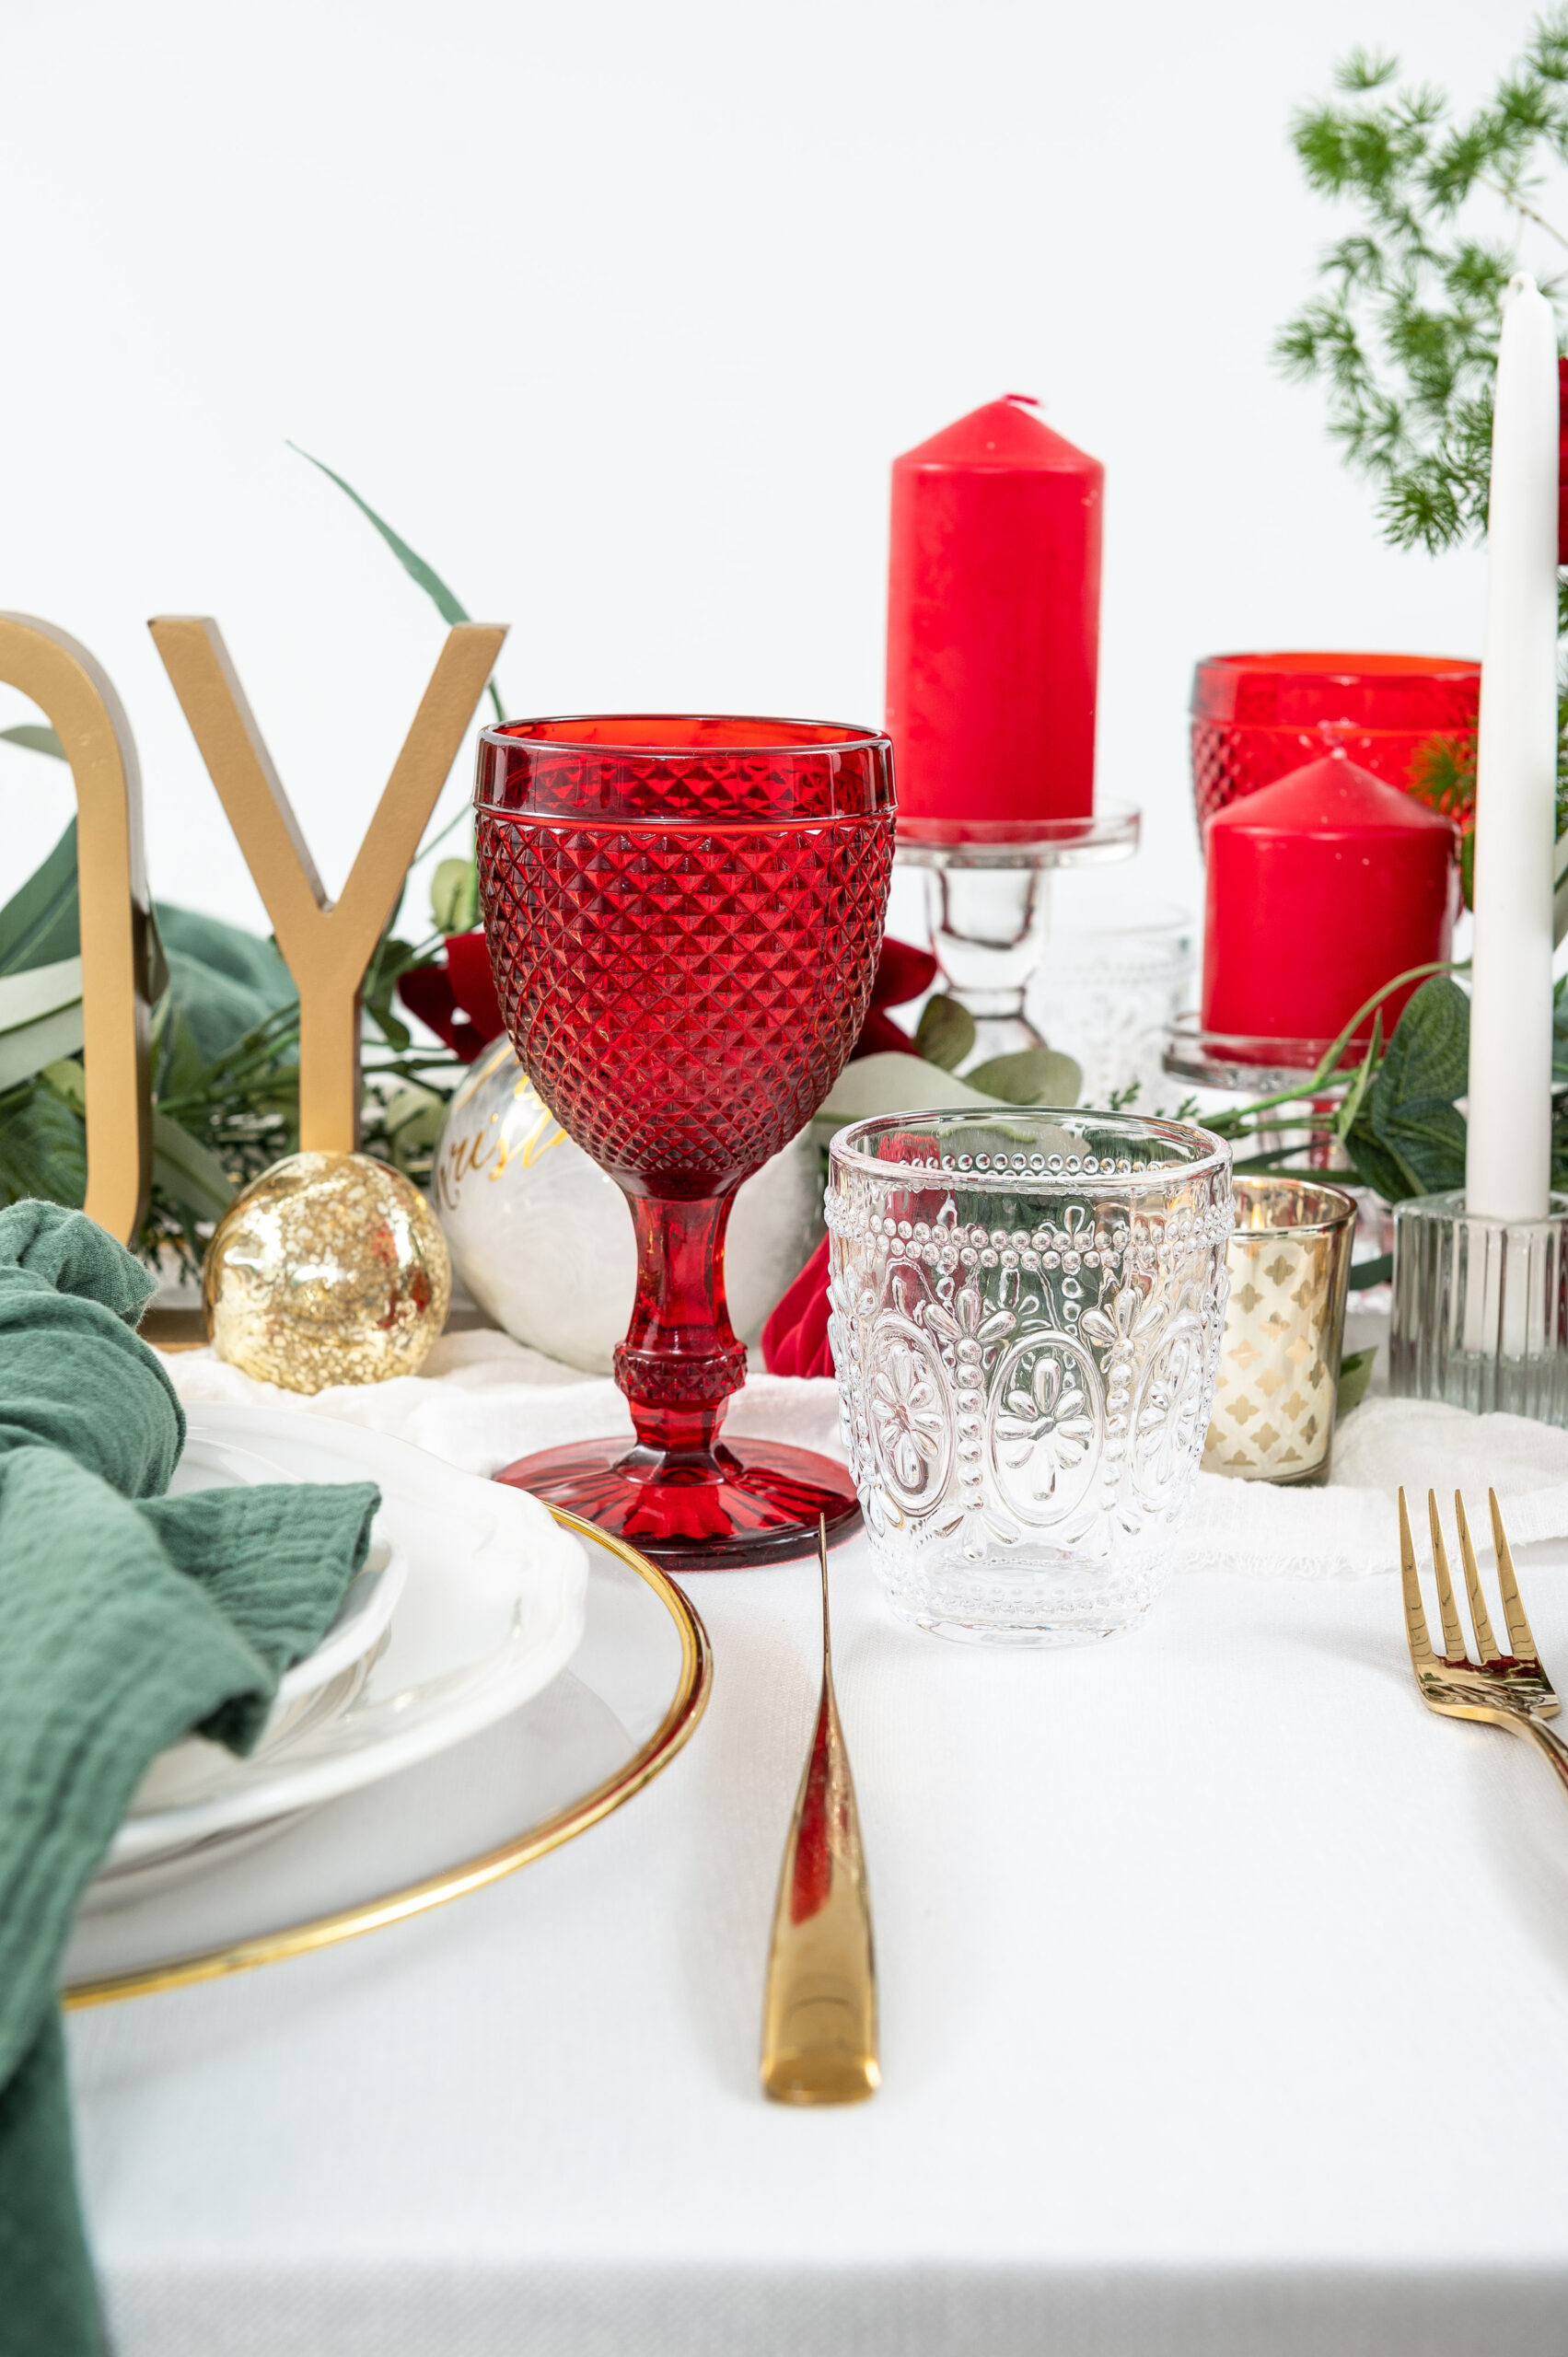 The Classic Christmas Tablescape